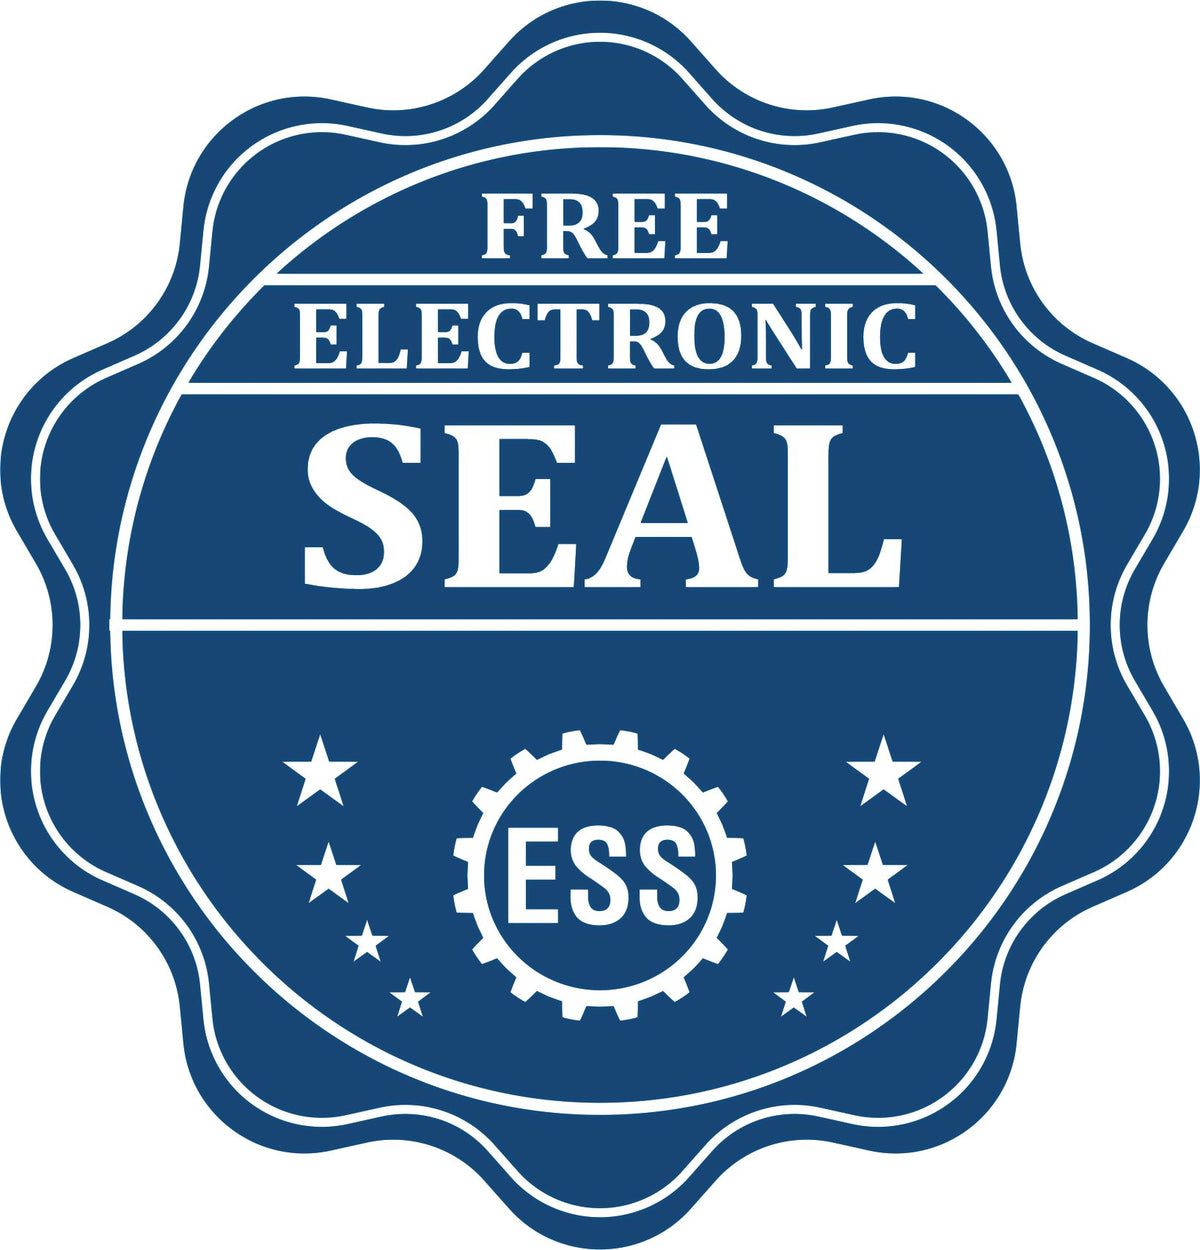 A badge showing a free electronic seal for the Long Reach Colorado Geology Seal with stars and the ESS gear on the emblem.